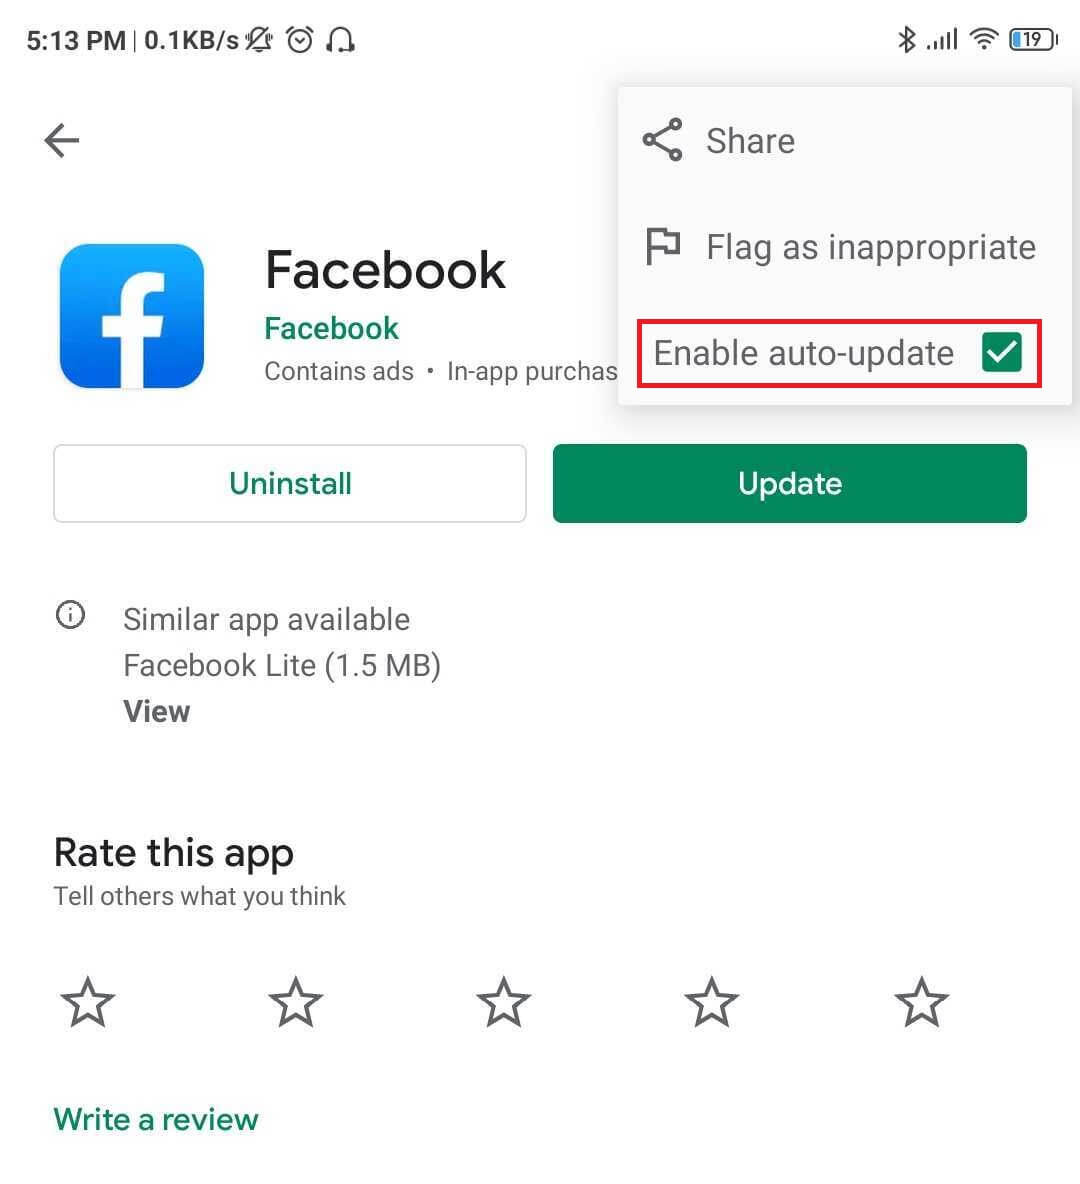 enable auto-update for the Facebook app in the Google Play Store.